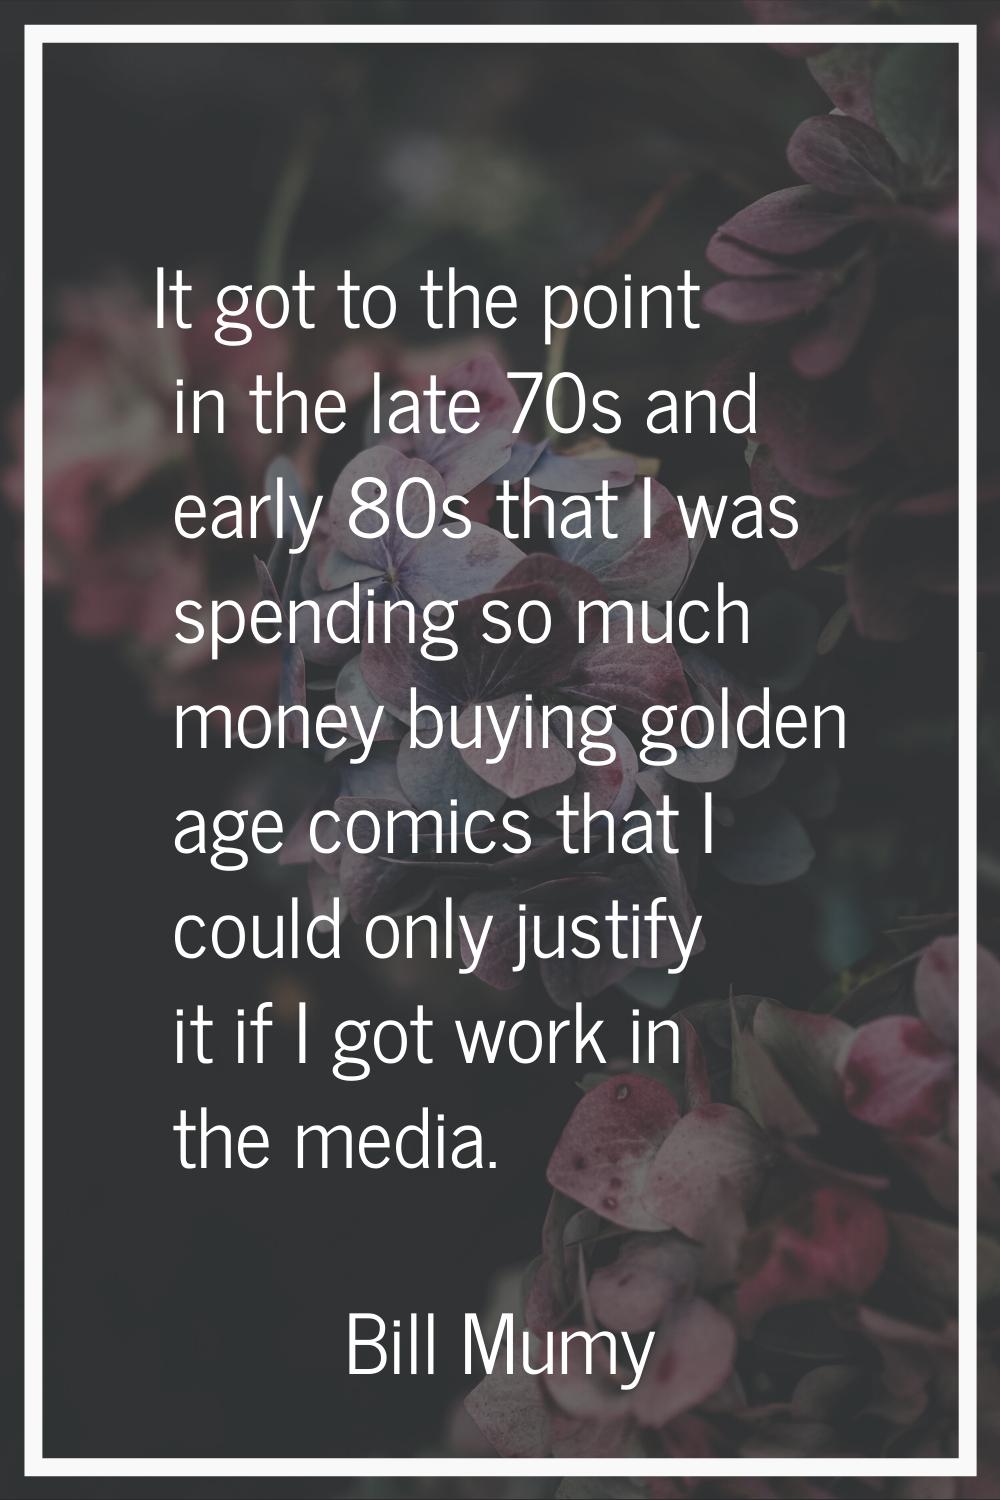 It got to the point in the late 70s and early 80s that I was spending so much money buying golden a